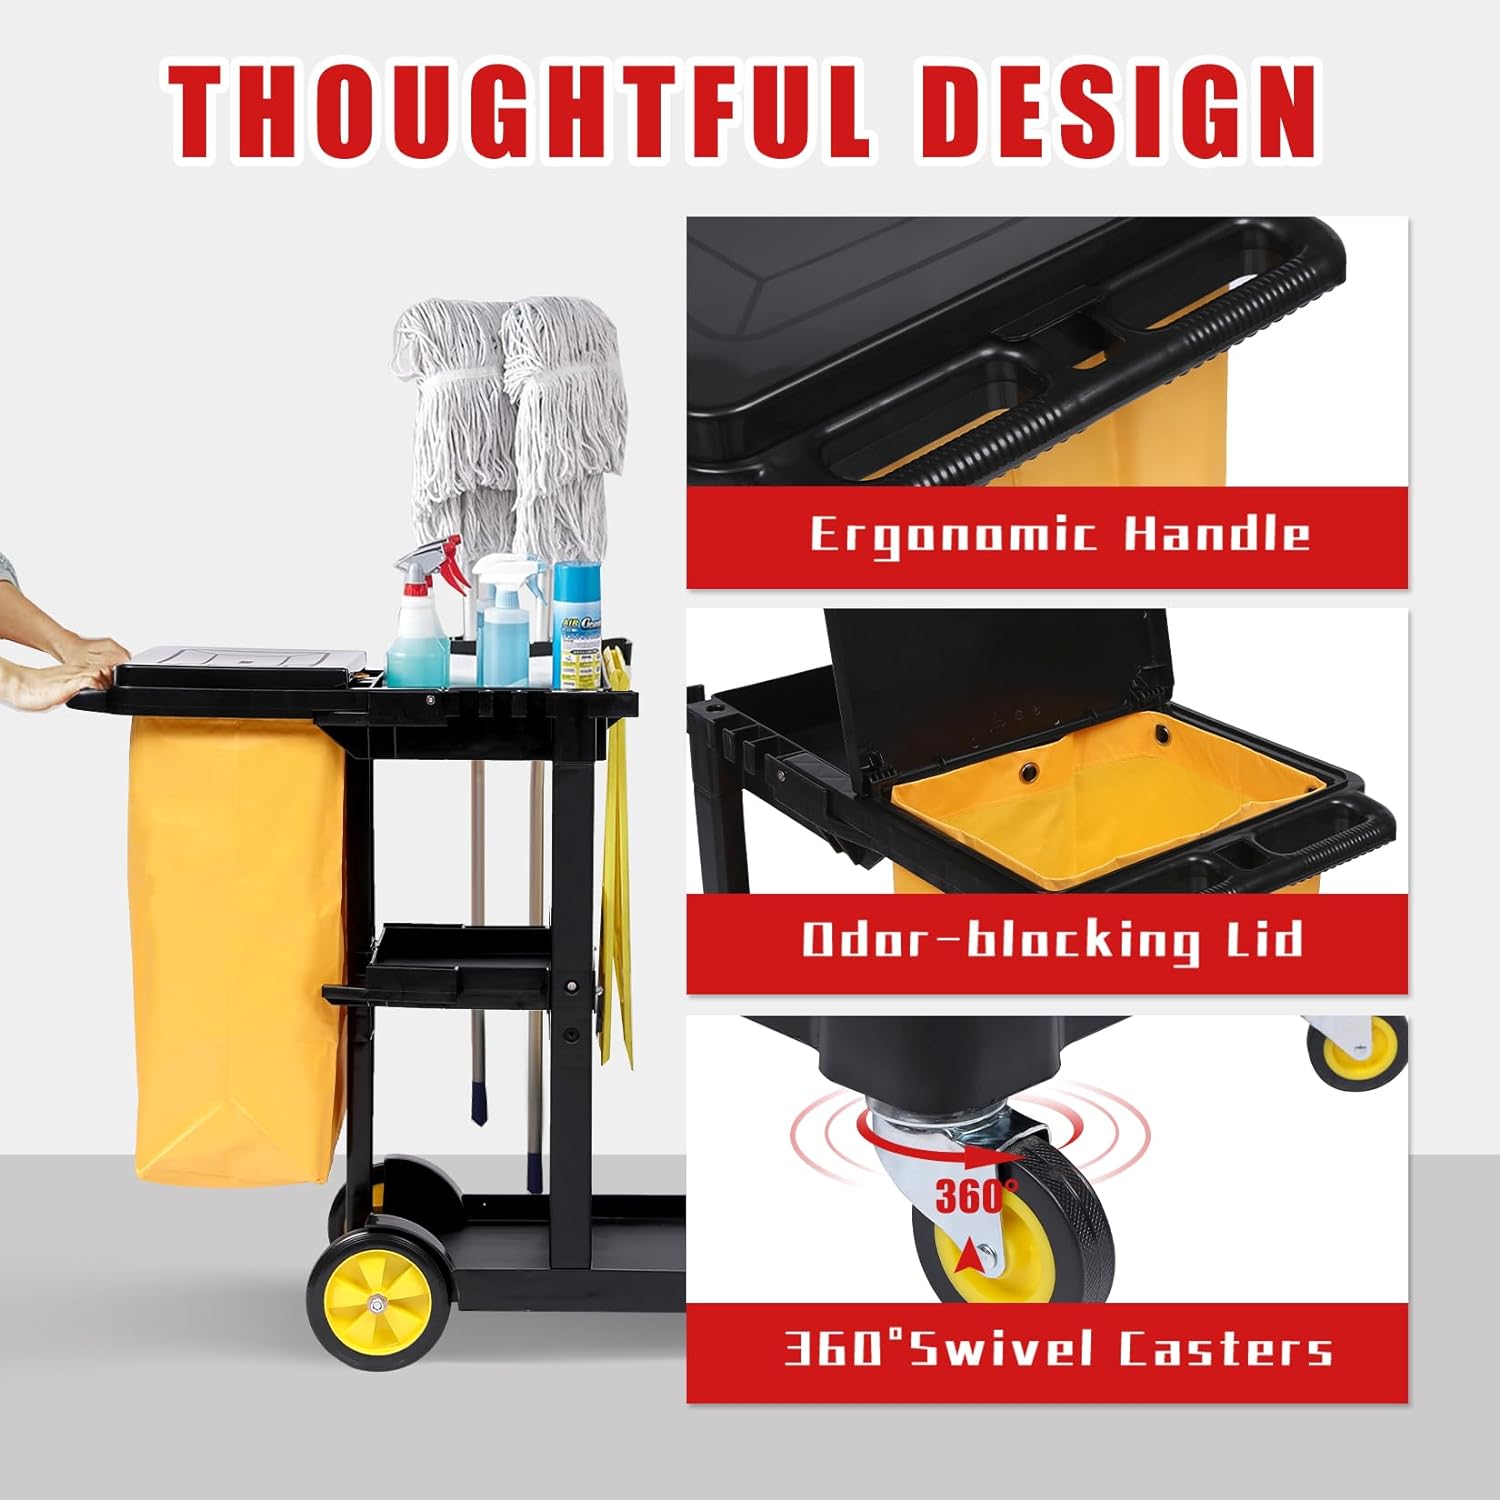 Commercial Janitorial Cleaning Cart, 3-Tier Janitorial Cart 500LBs Capacity Housekeeping Cart, Wheeled with 25 Gallon Yellow PVC Bag and Cover Lid